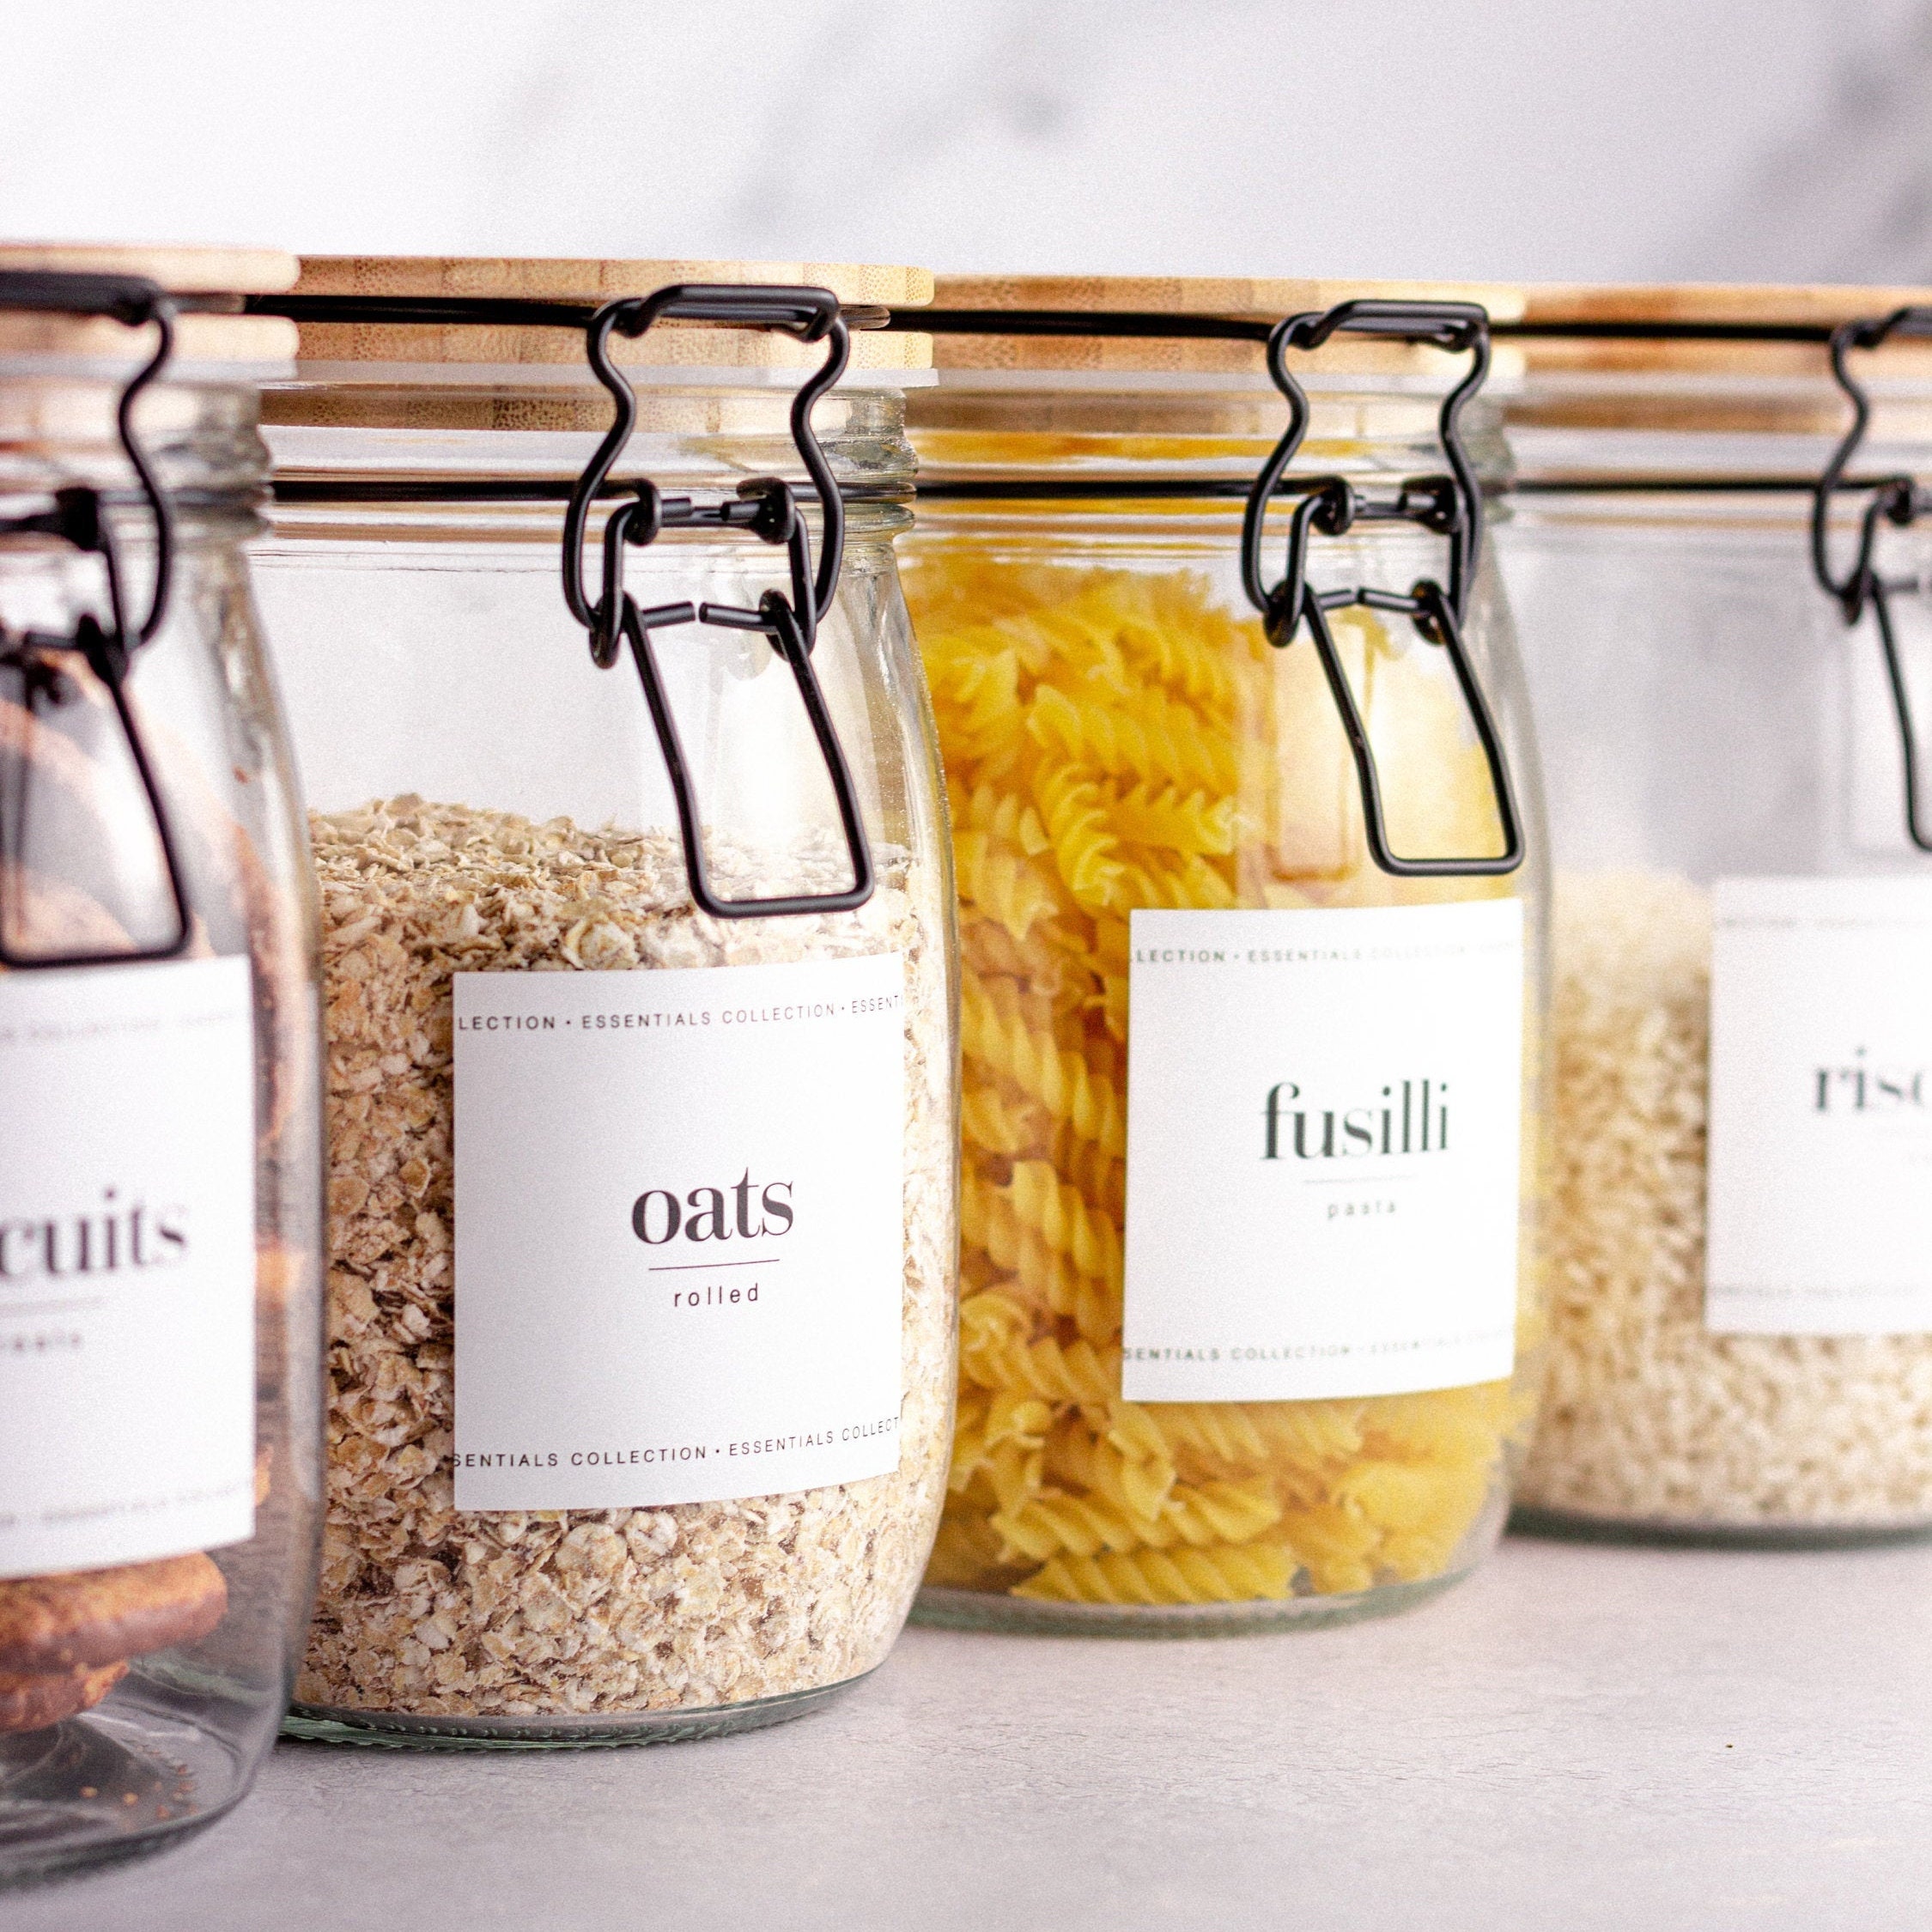 KITCHEN ALMIGHTY Pantry Labels Jars & Canisters w/a Extra Write-on Sticker 323 Delicate Display Gloss Clear Preprinted Water Resistant Complete Label Set to Organize Storage Containers